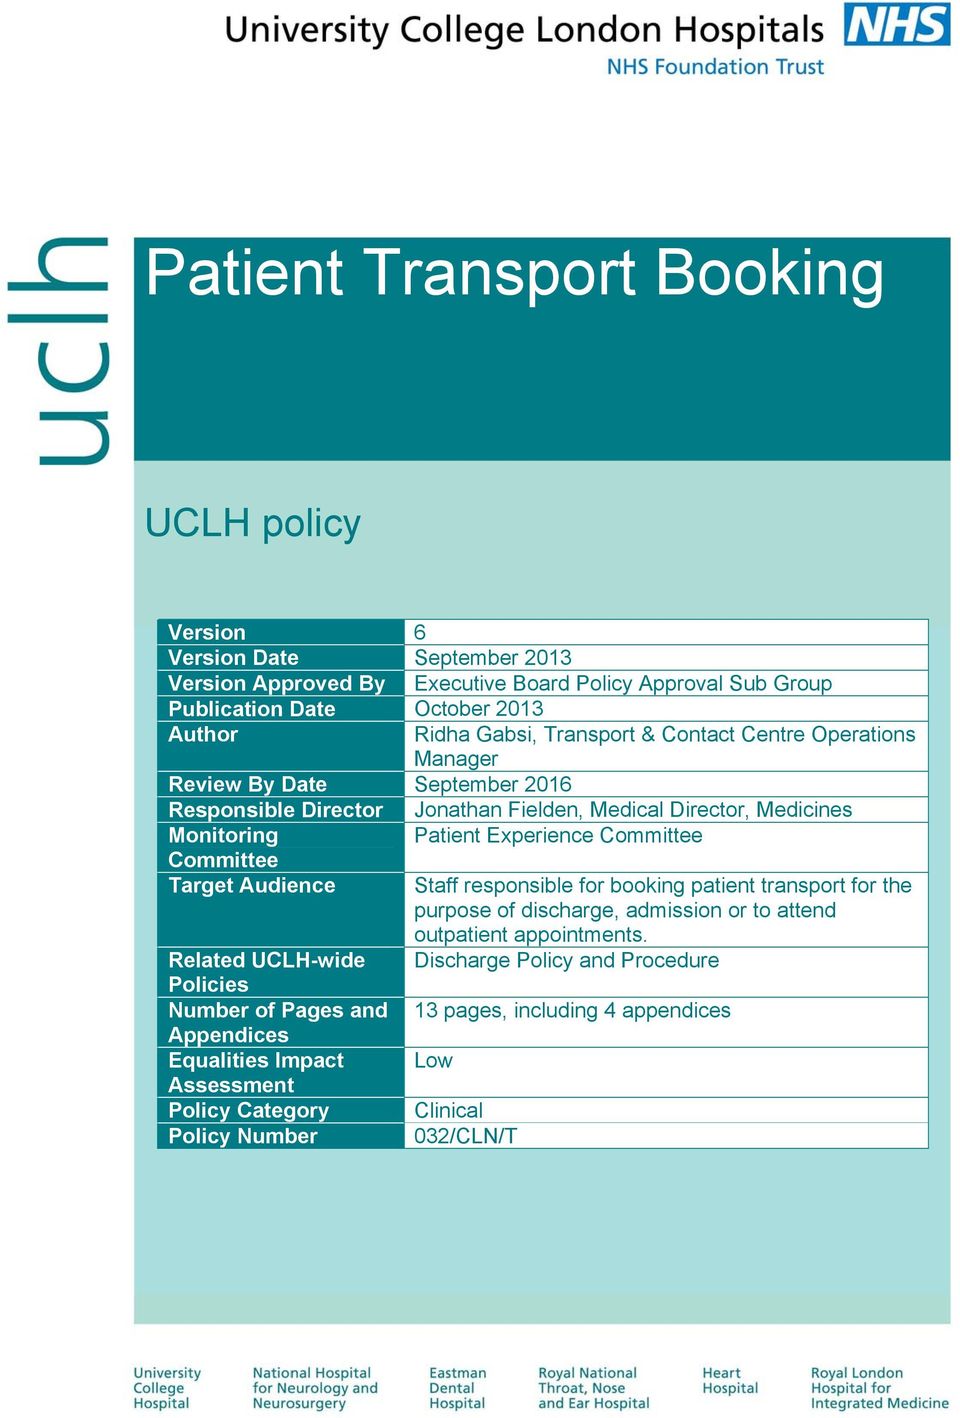 Committee Committee Target Audience Staff responsible for booking patient transport for the purpose of discharge, admission or to attend outpatient appointments.